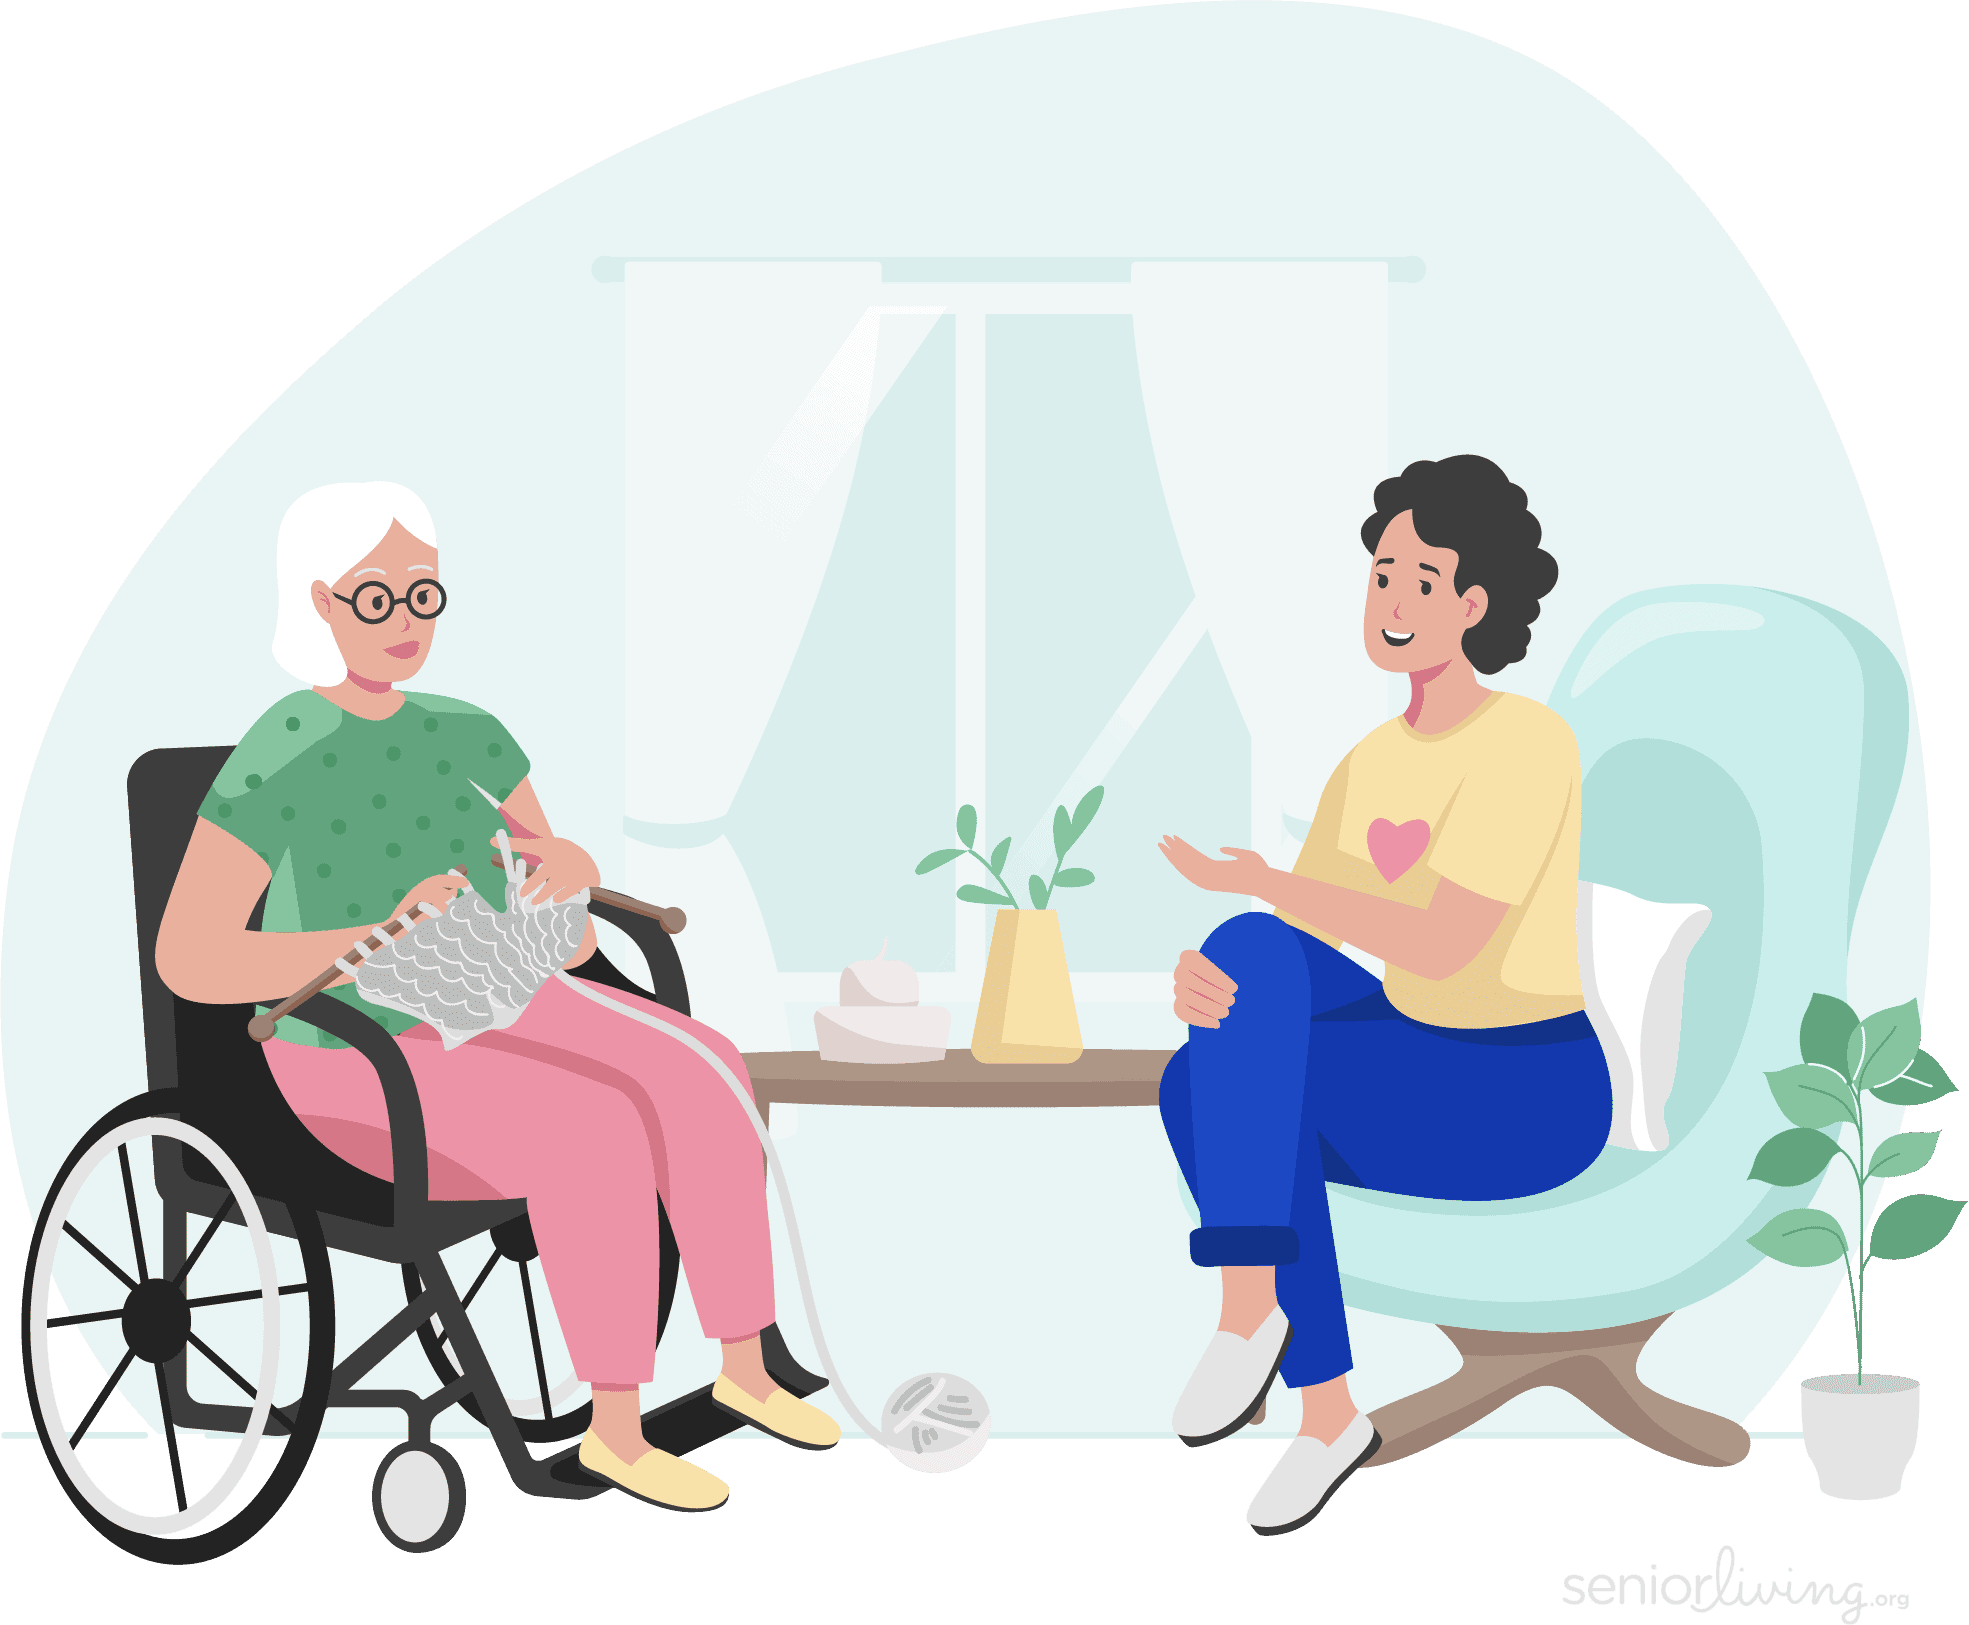 What is companion care